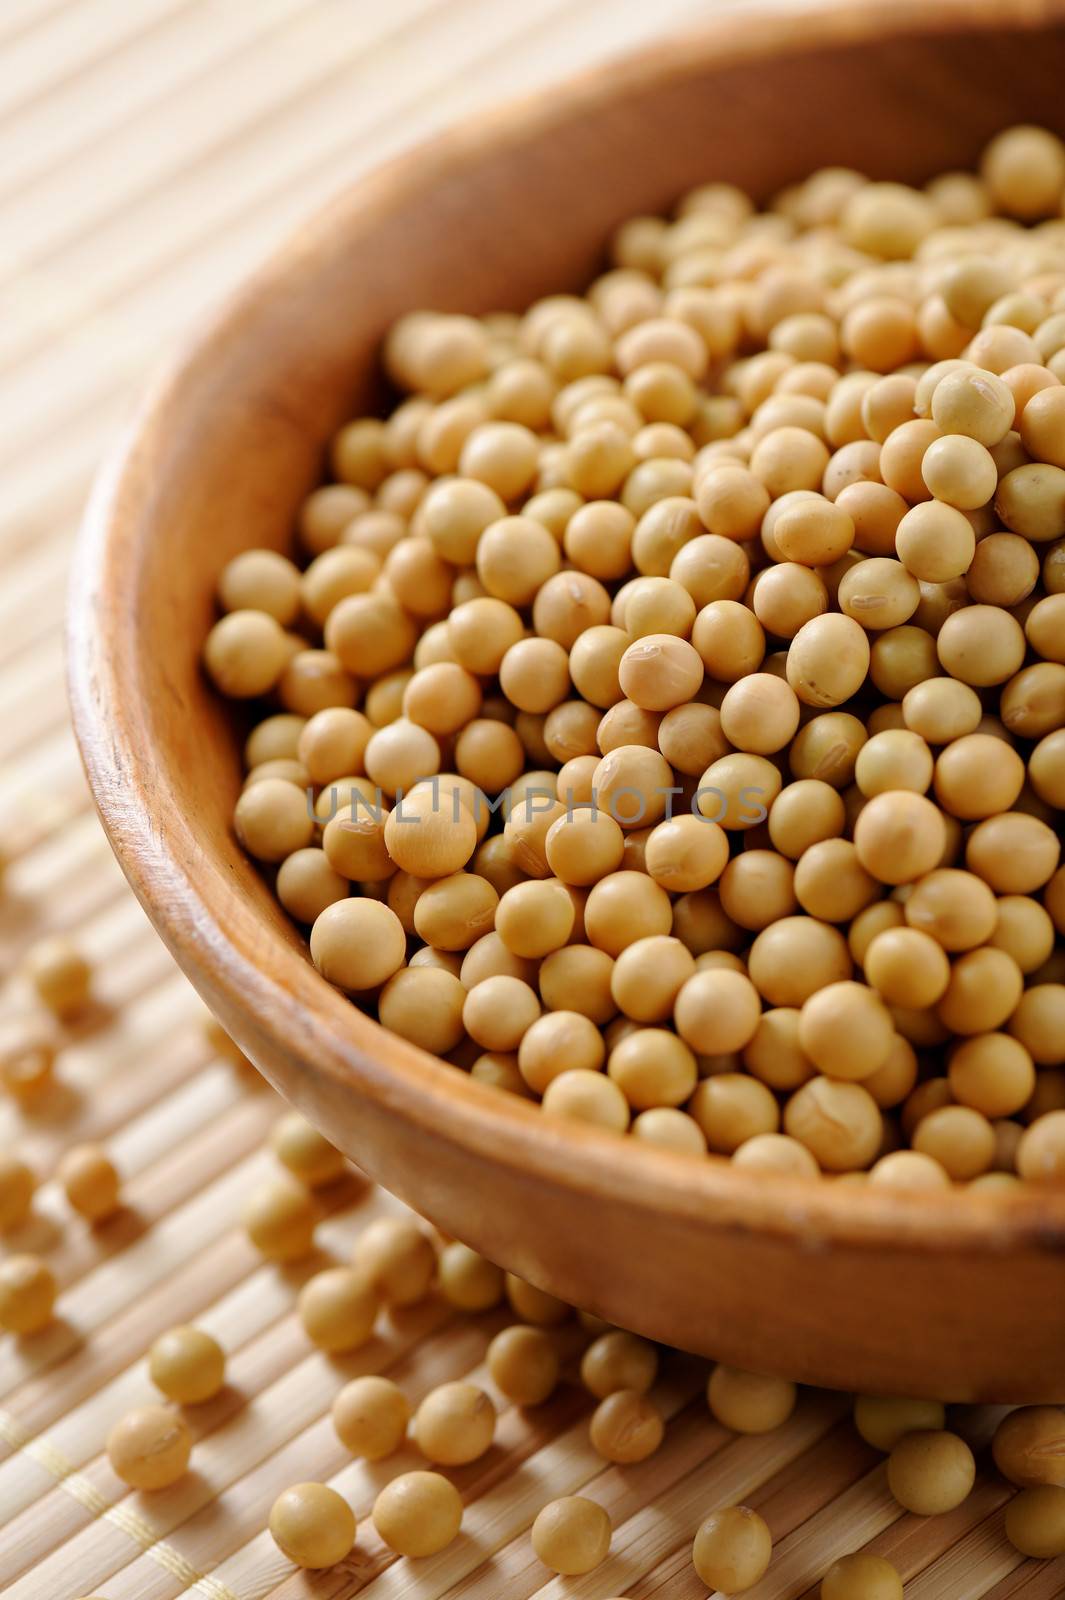 Wooden bowl full of soybeans